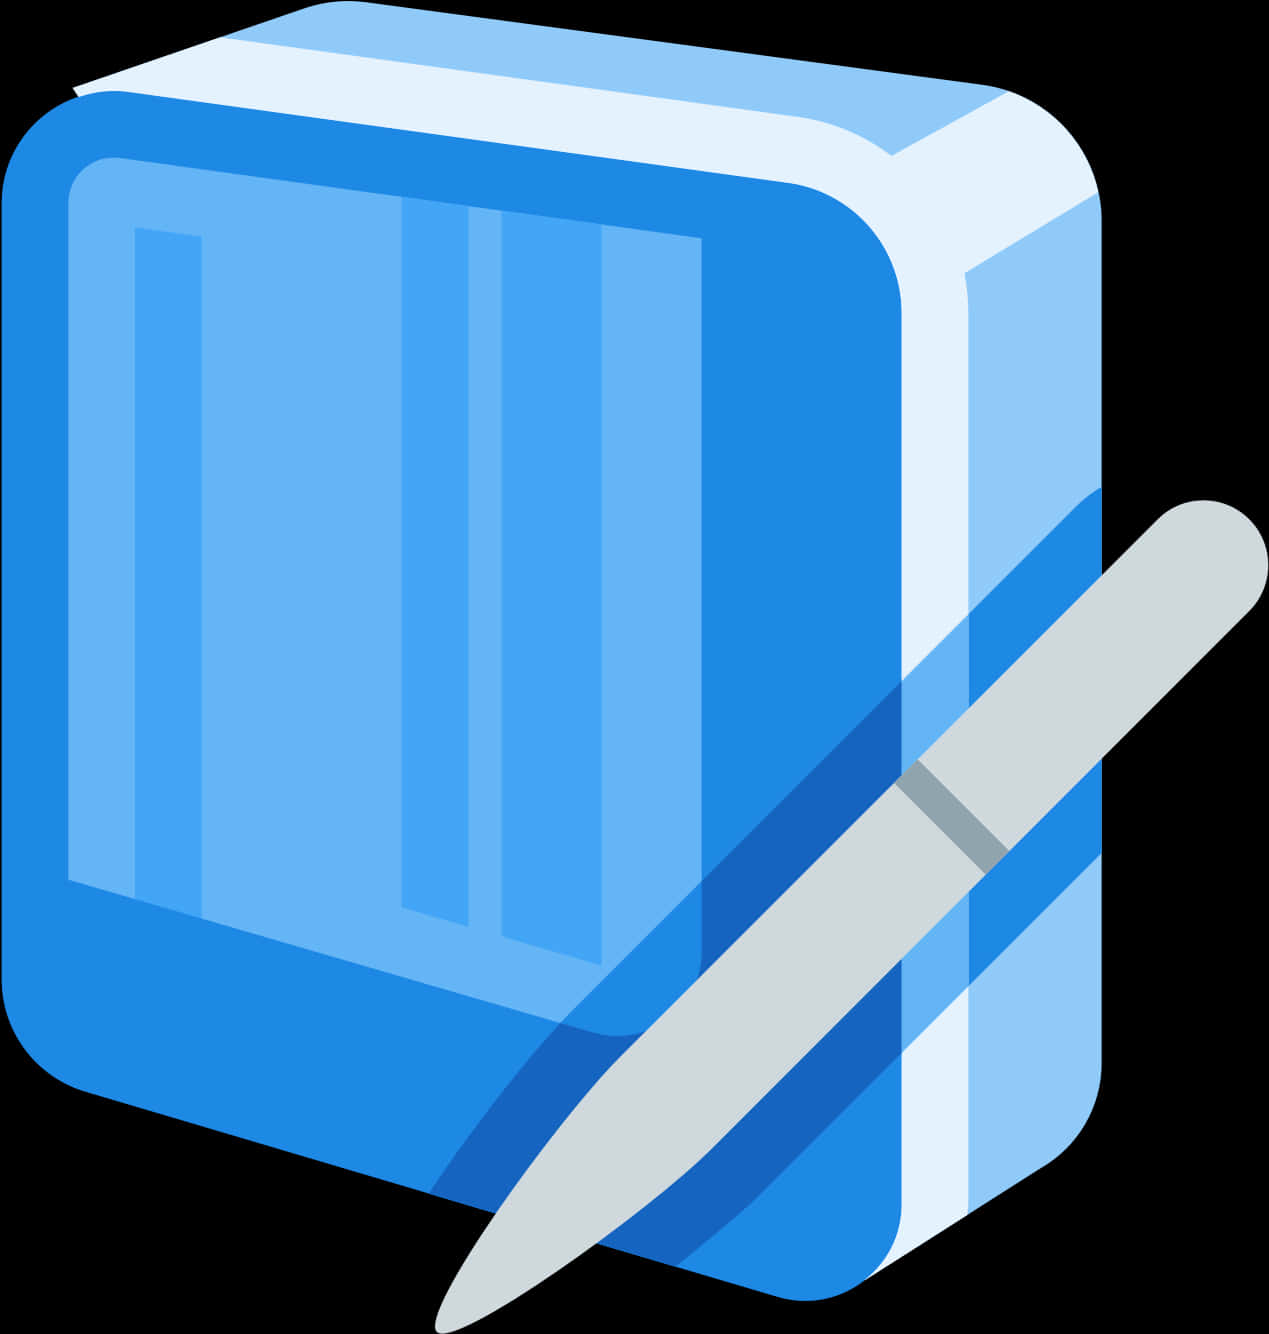 A Blue Square With A Pen